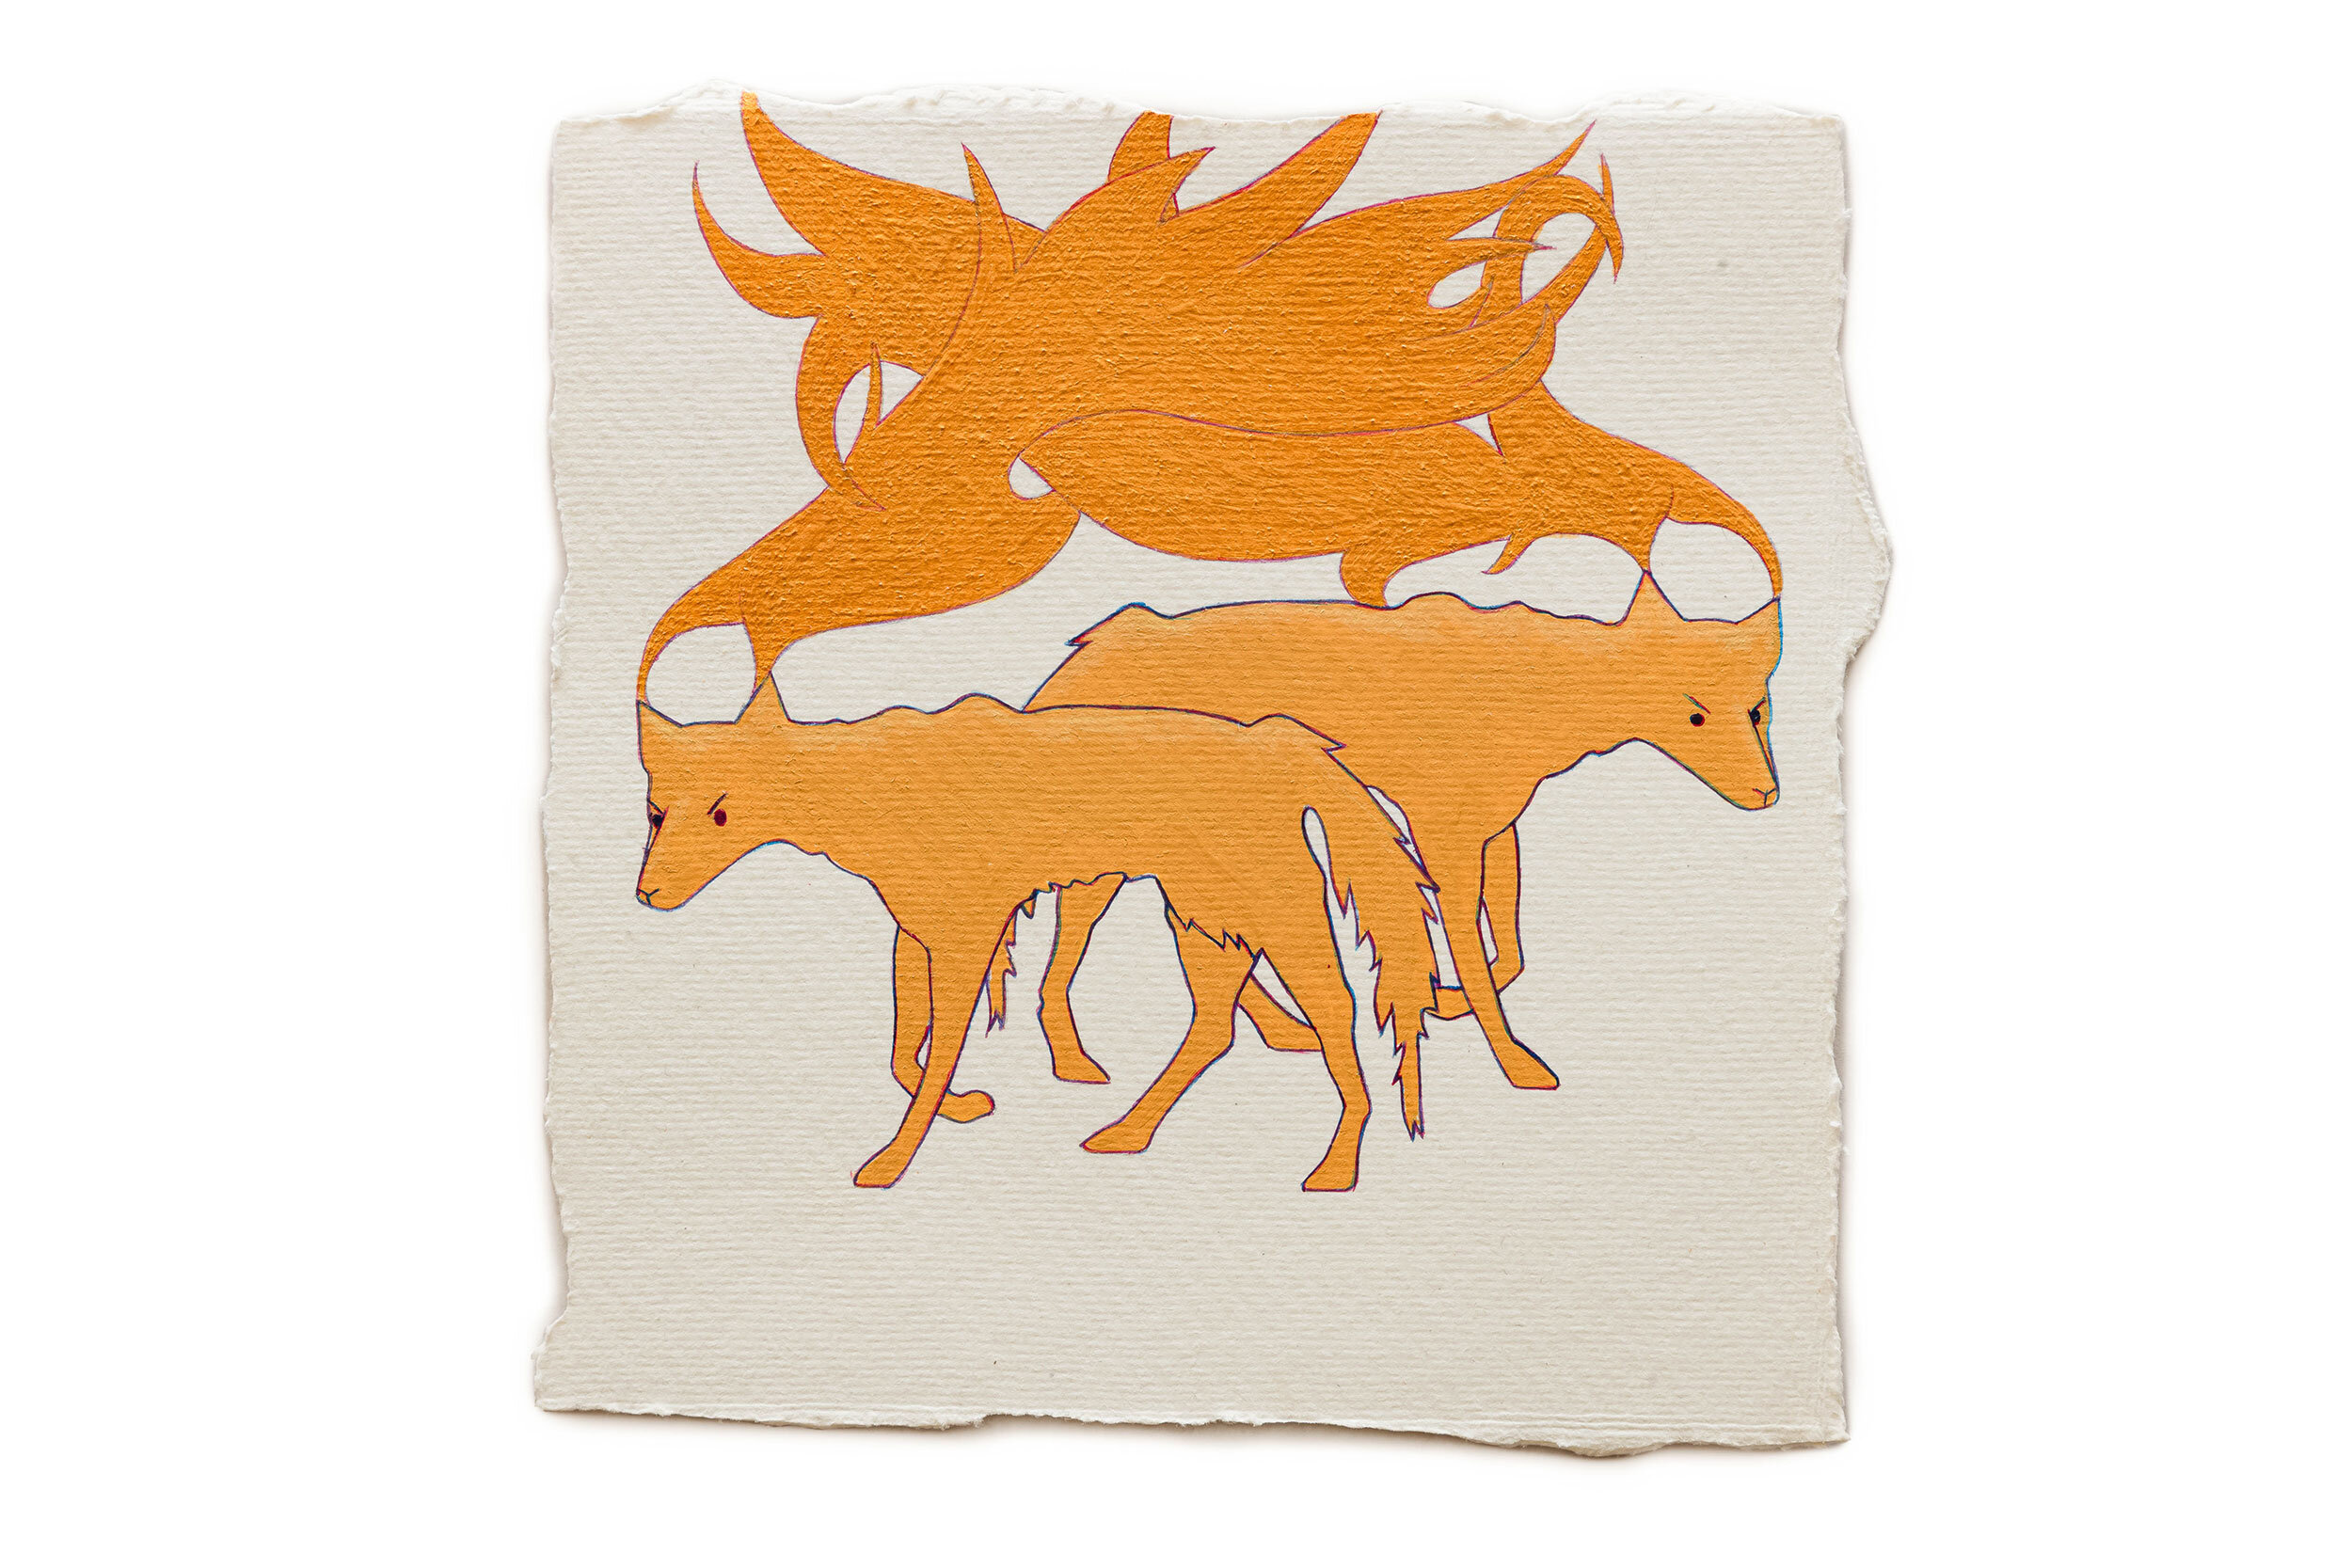   Fire Diary (coyote brothers, in memoriam),  2019 Acrylic on paper, 6” x 6” each 